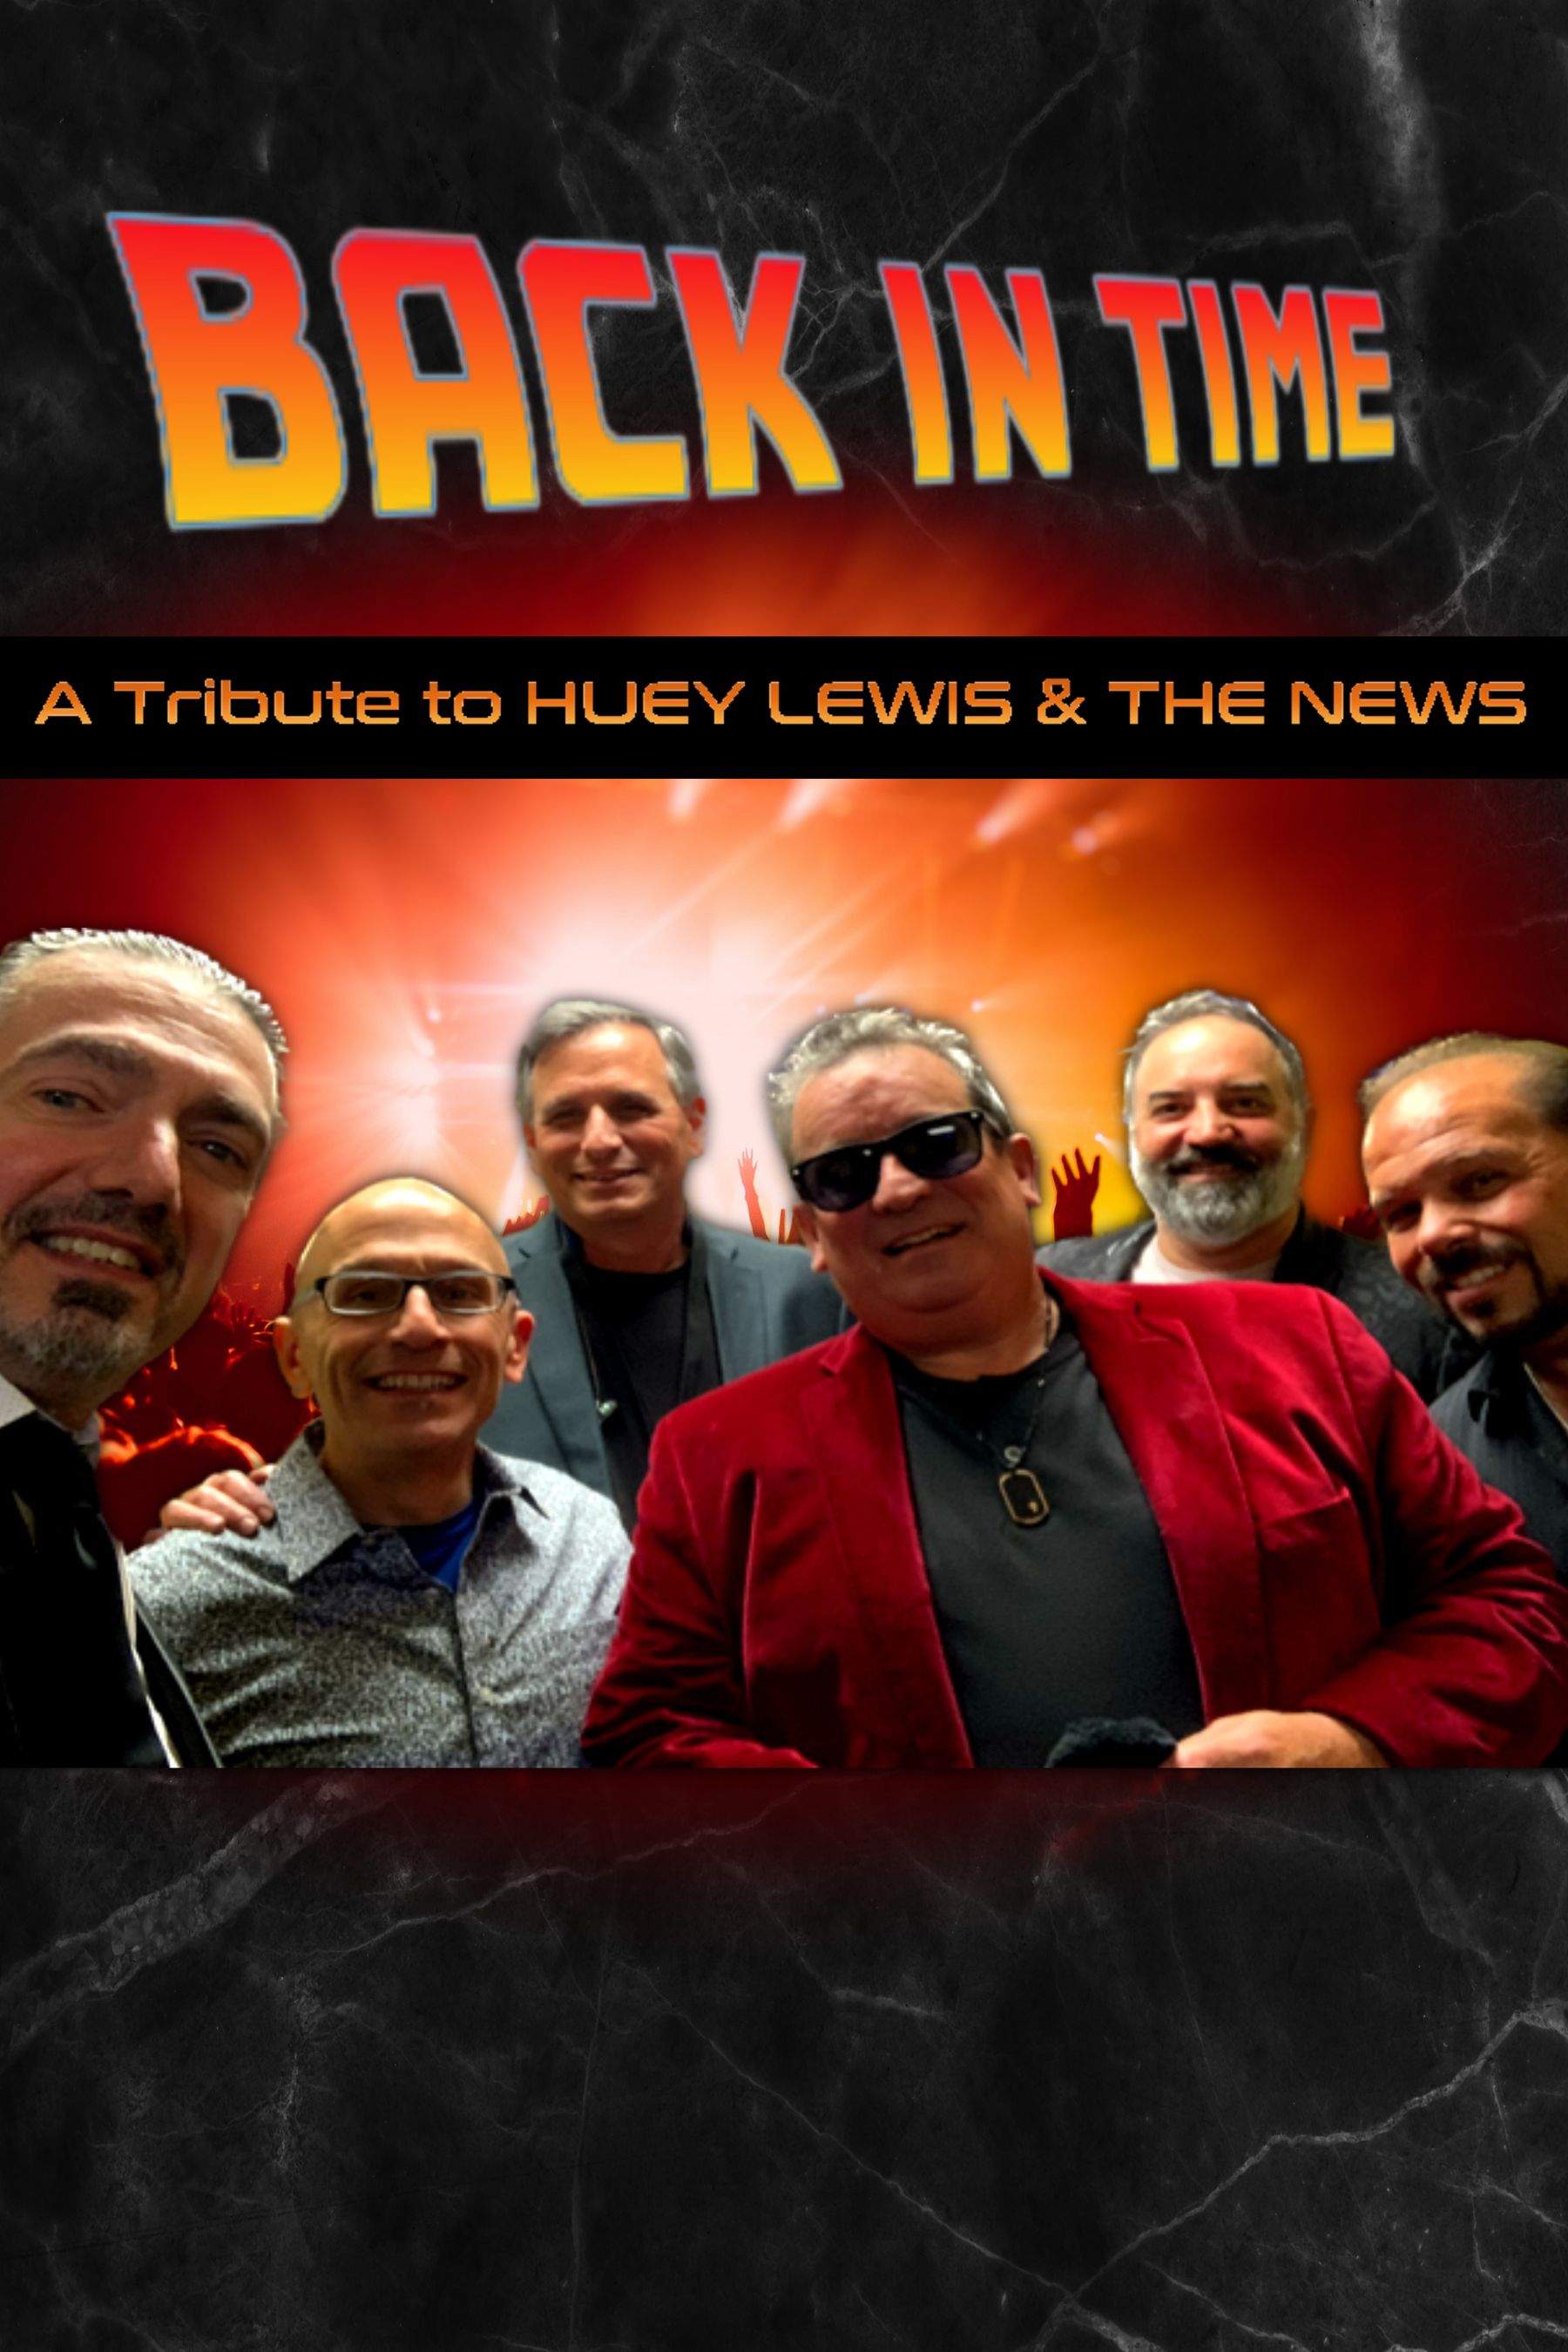 "BACK IN TIME" A Tribute to Huey Lewis & the News